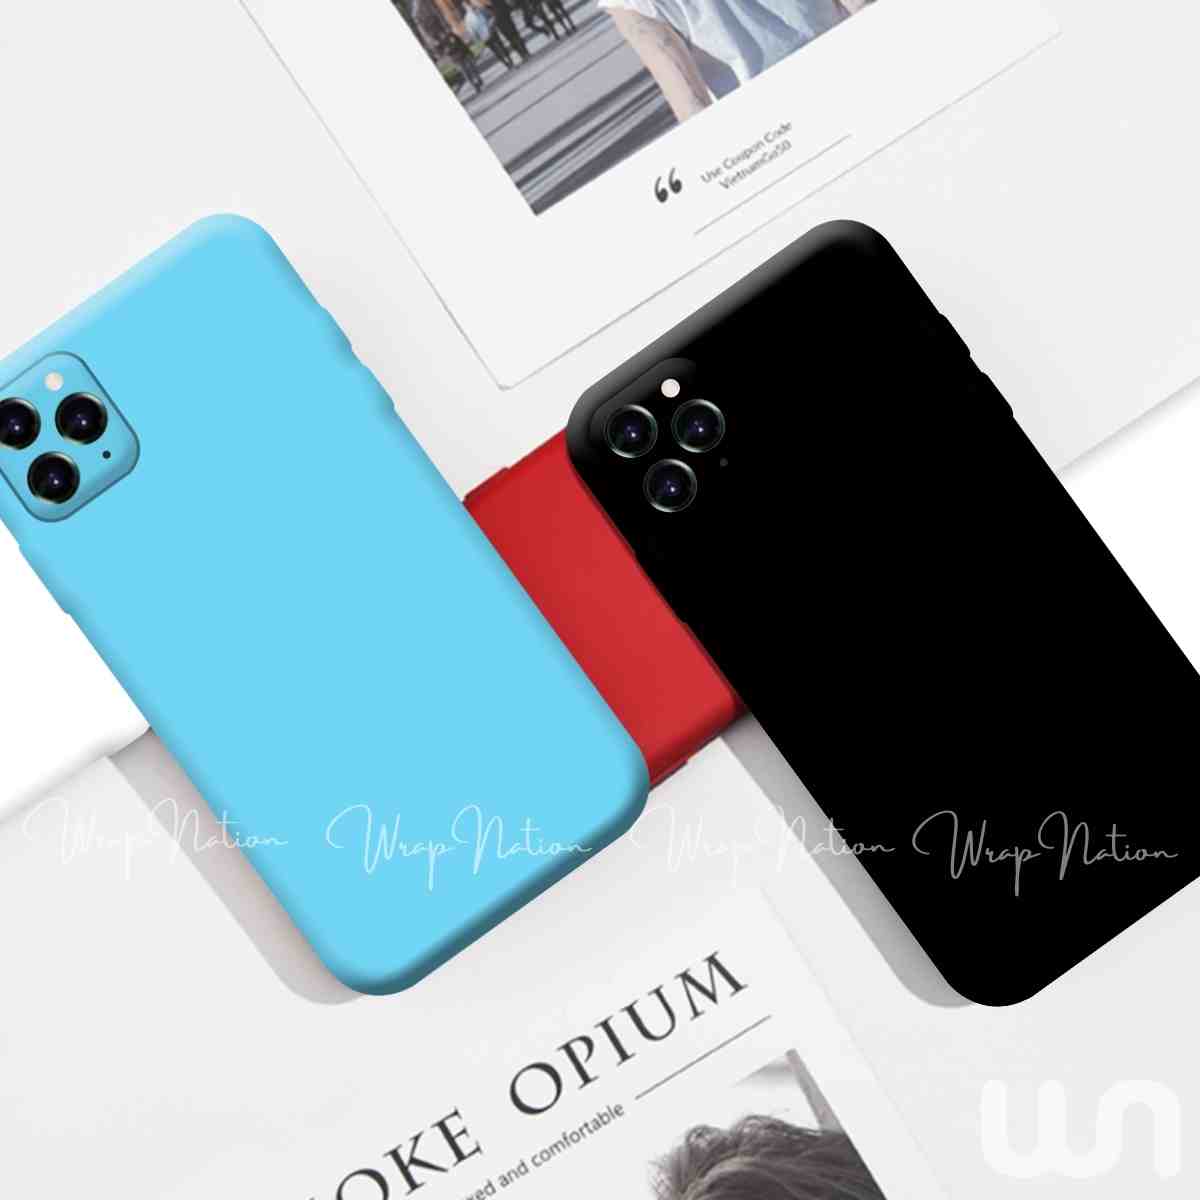 Color Silicon Cases with for Iphone 11 Pro